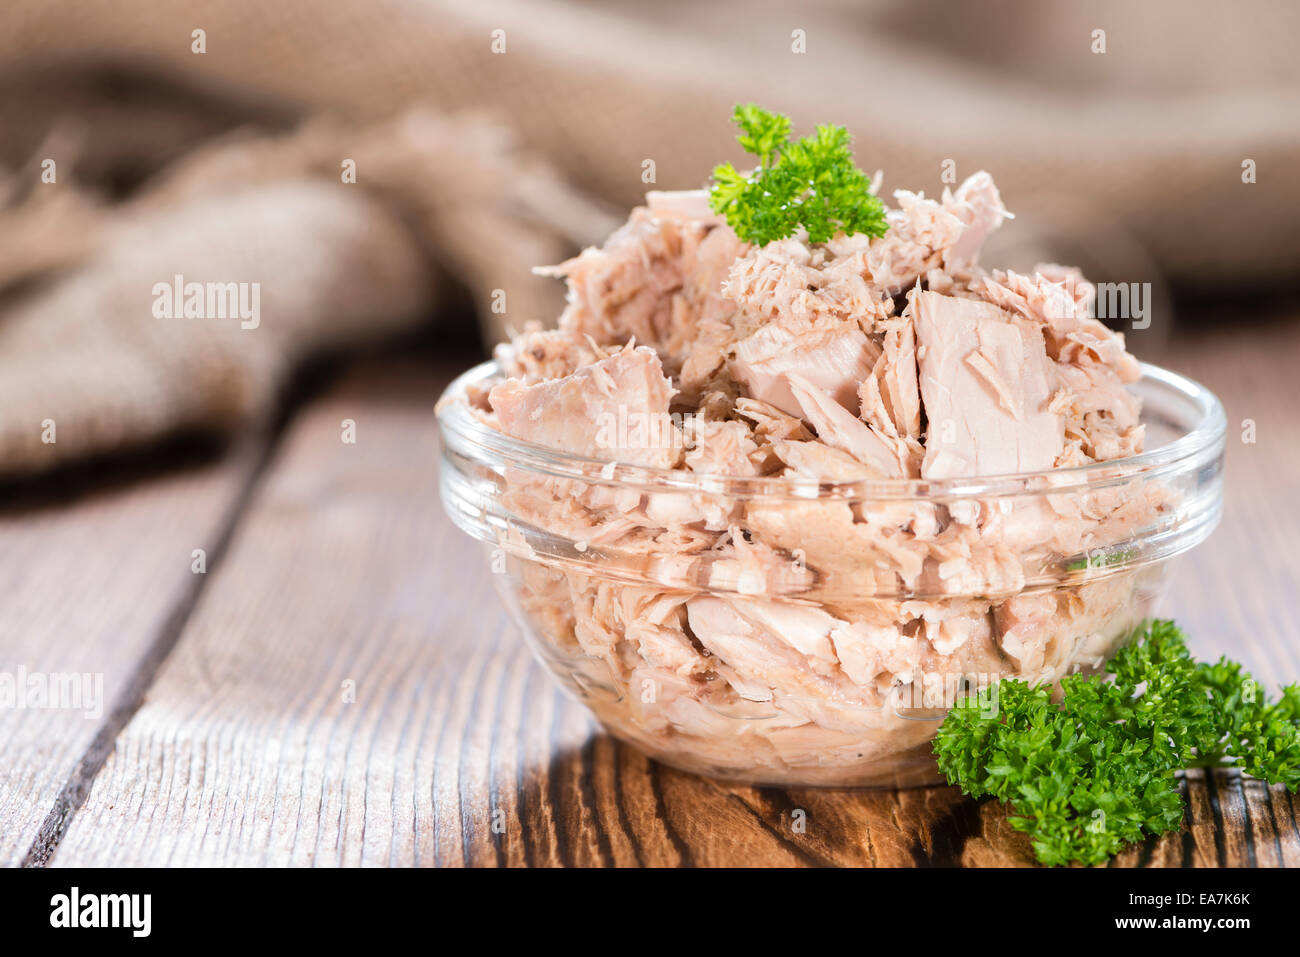 Portion of (canned) Tuna with fresh herbs as detailed close-up shot Stock Photo